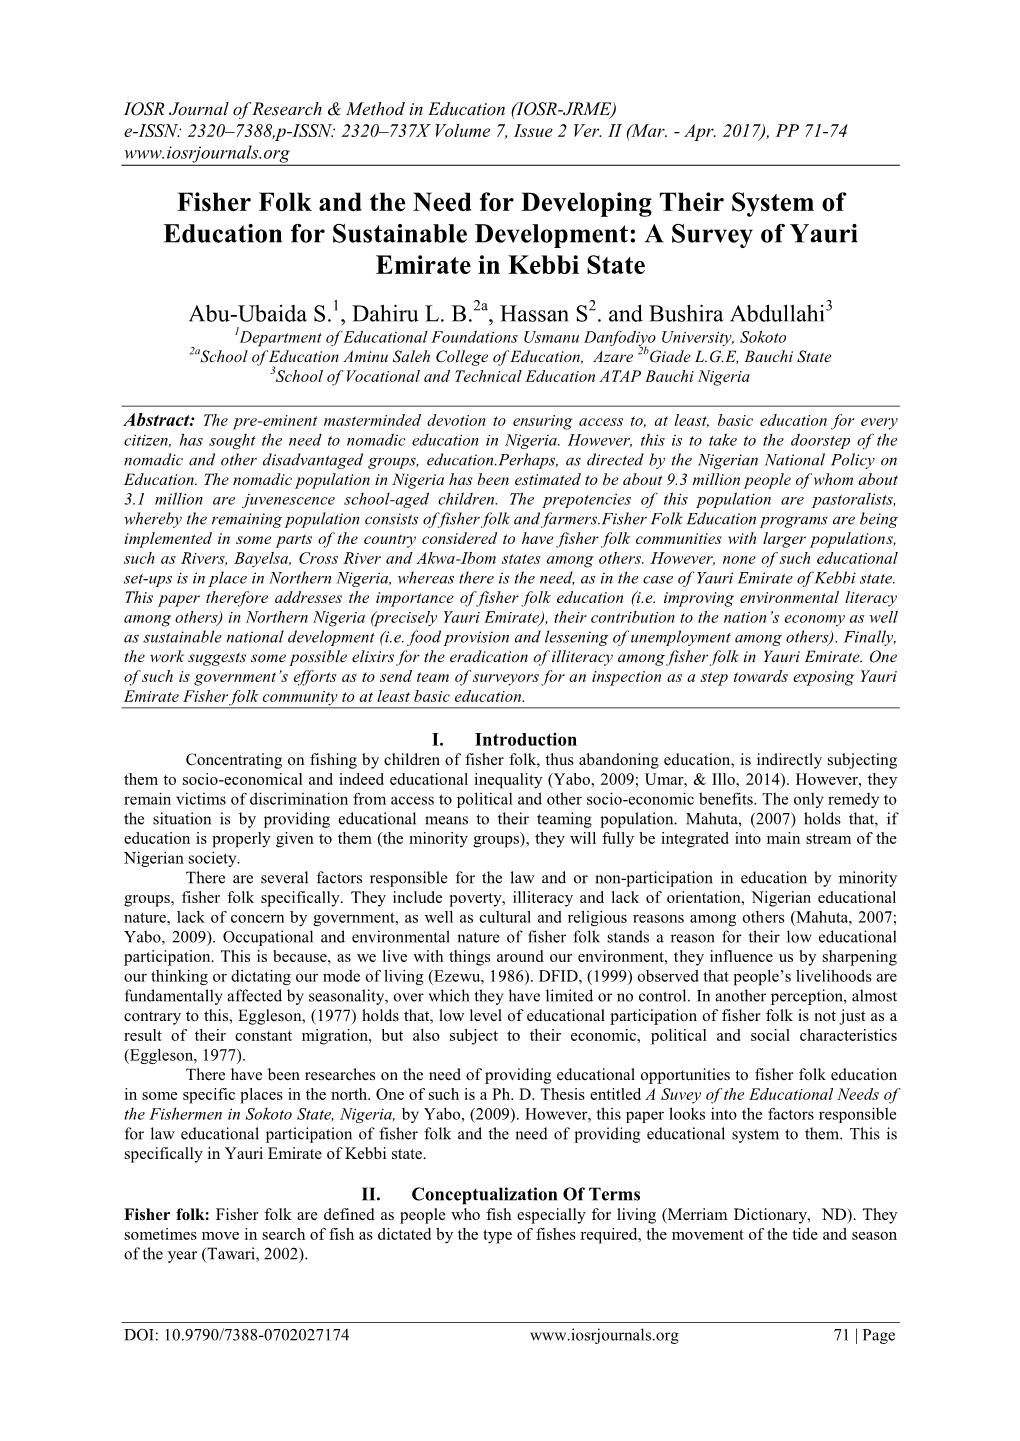 Fisher Folk and the Need for Developing Their System of Education for Sustainable Development: a Survey of Yauri Emirate in Kebbi State